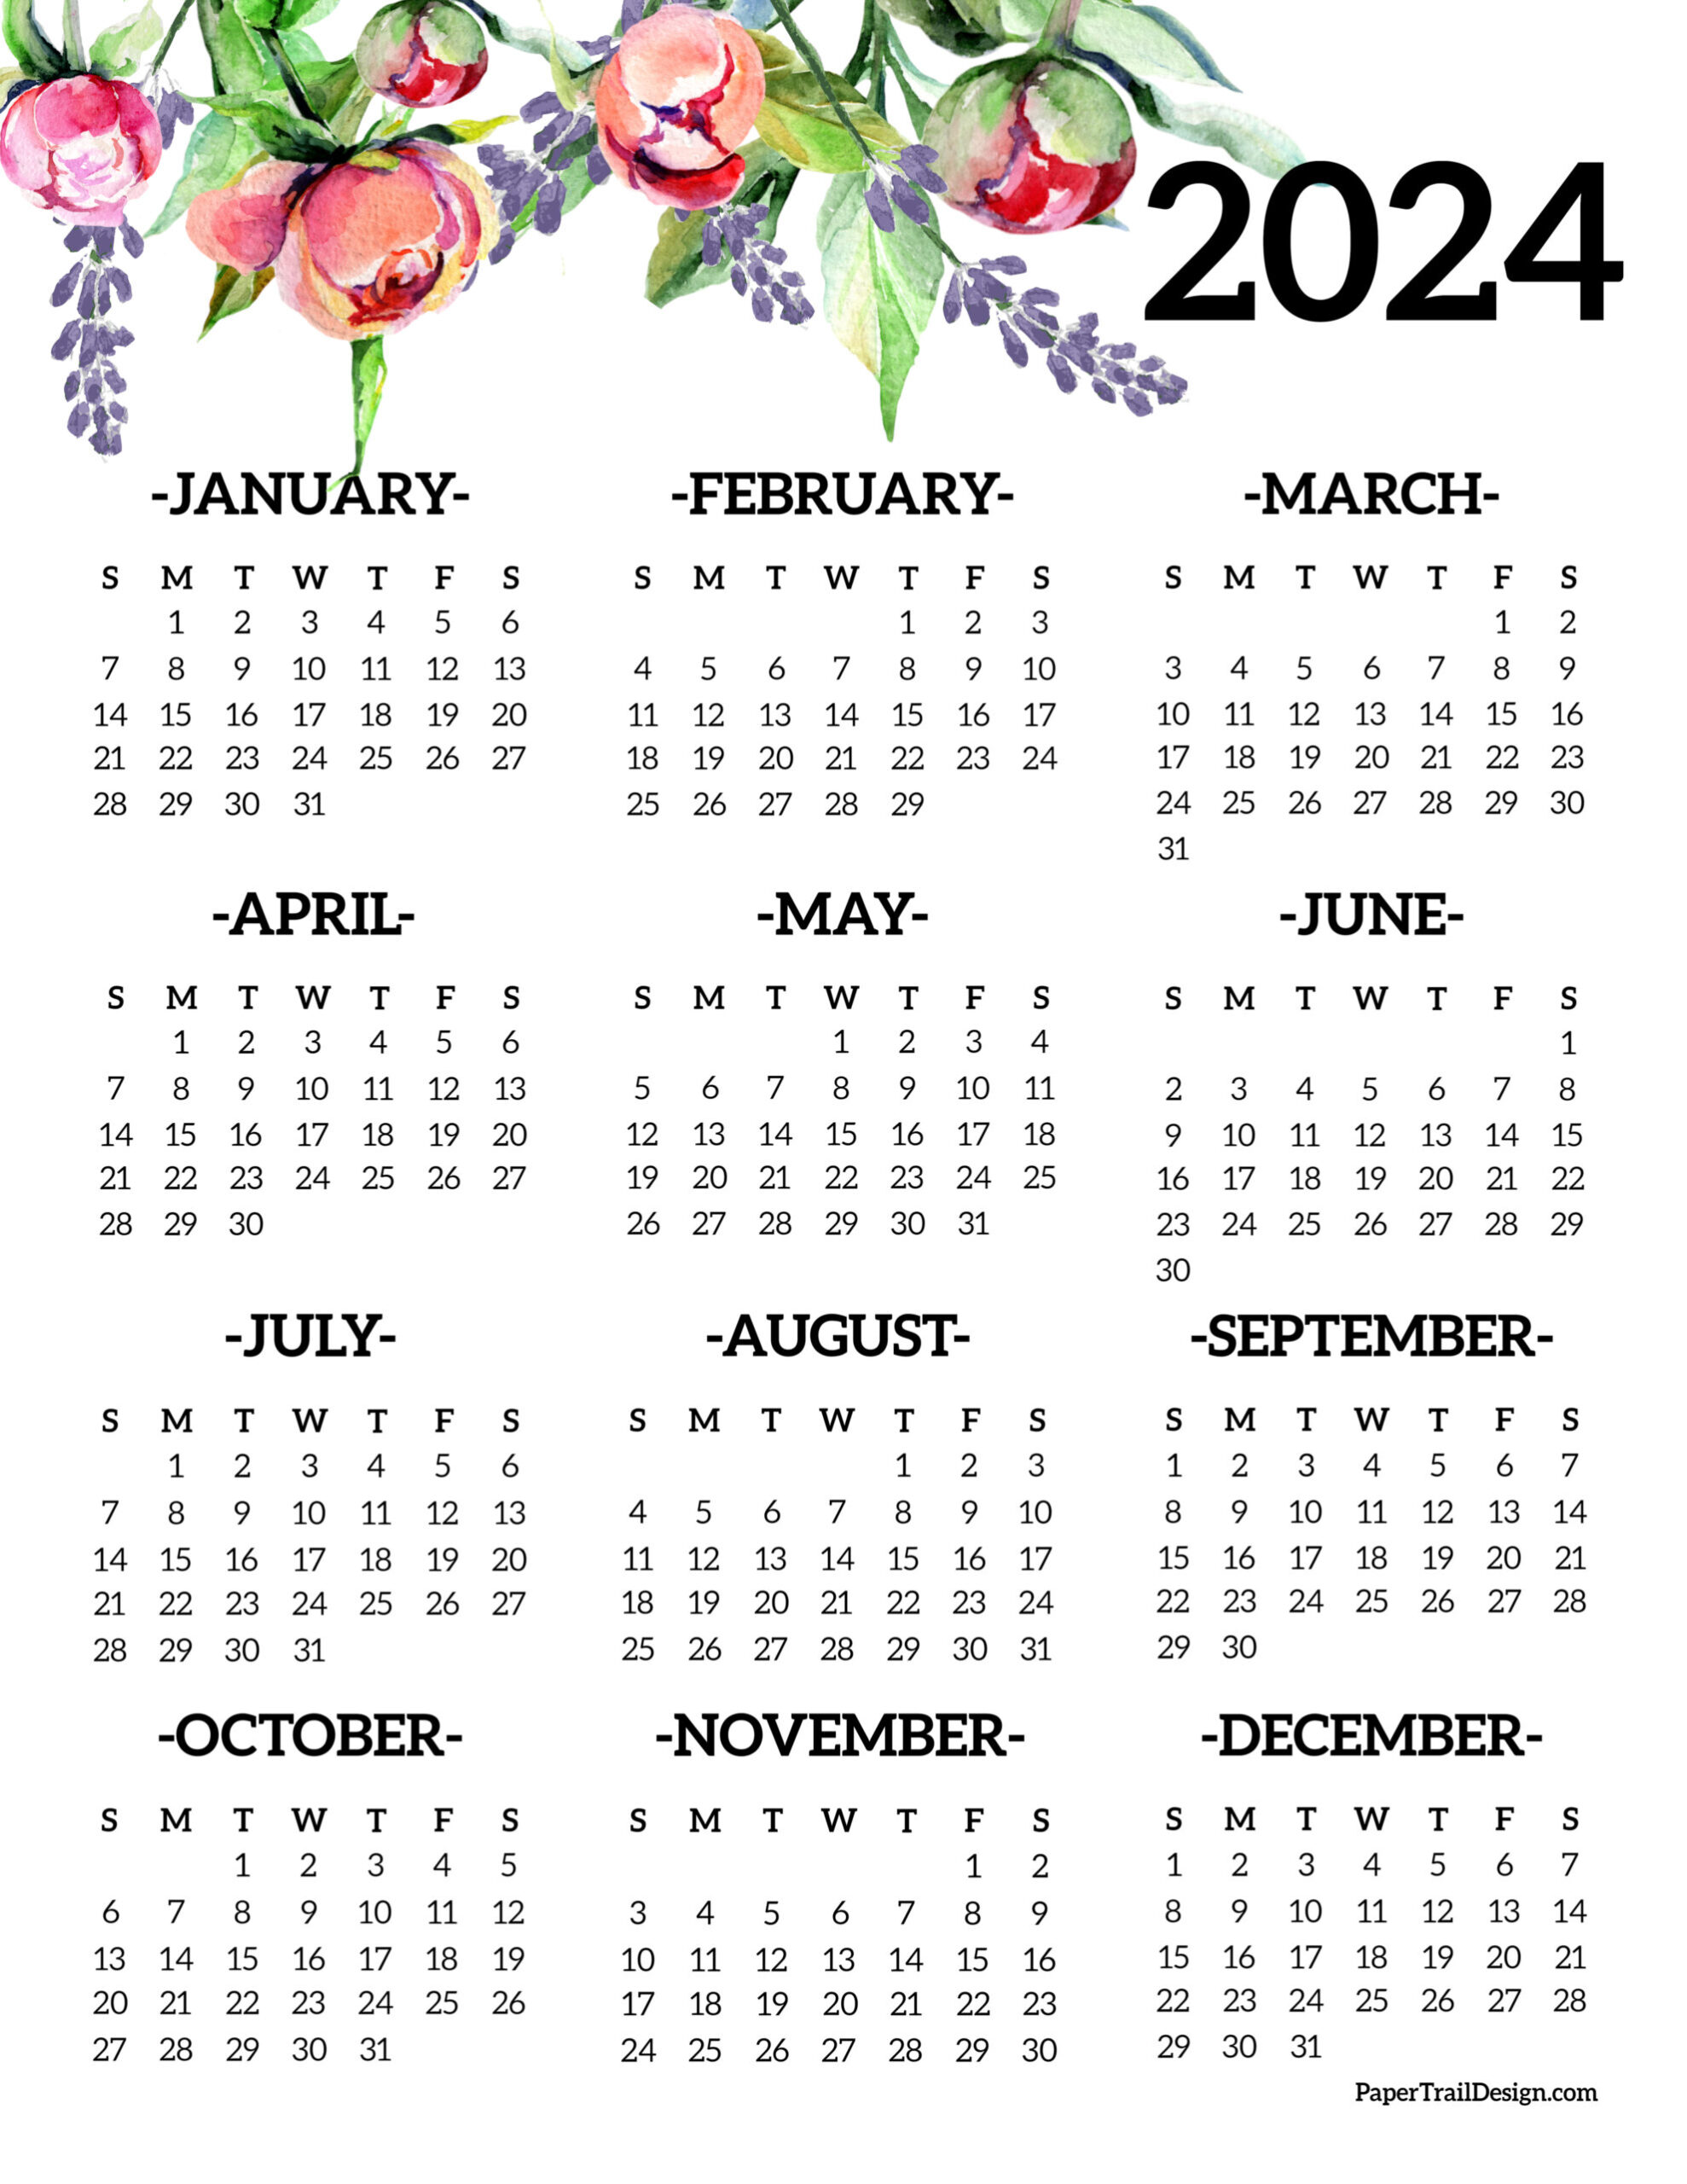 Calendar 2024 Printable One Page - Paper Trail Design for Free Printable Calendar 2024 One Page